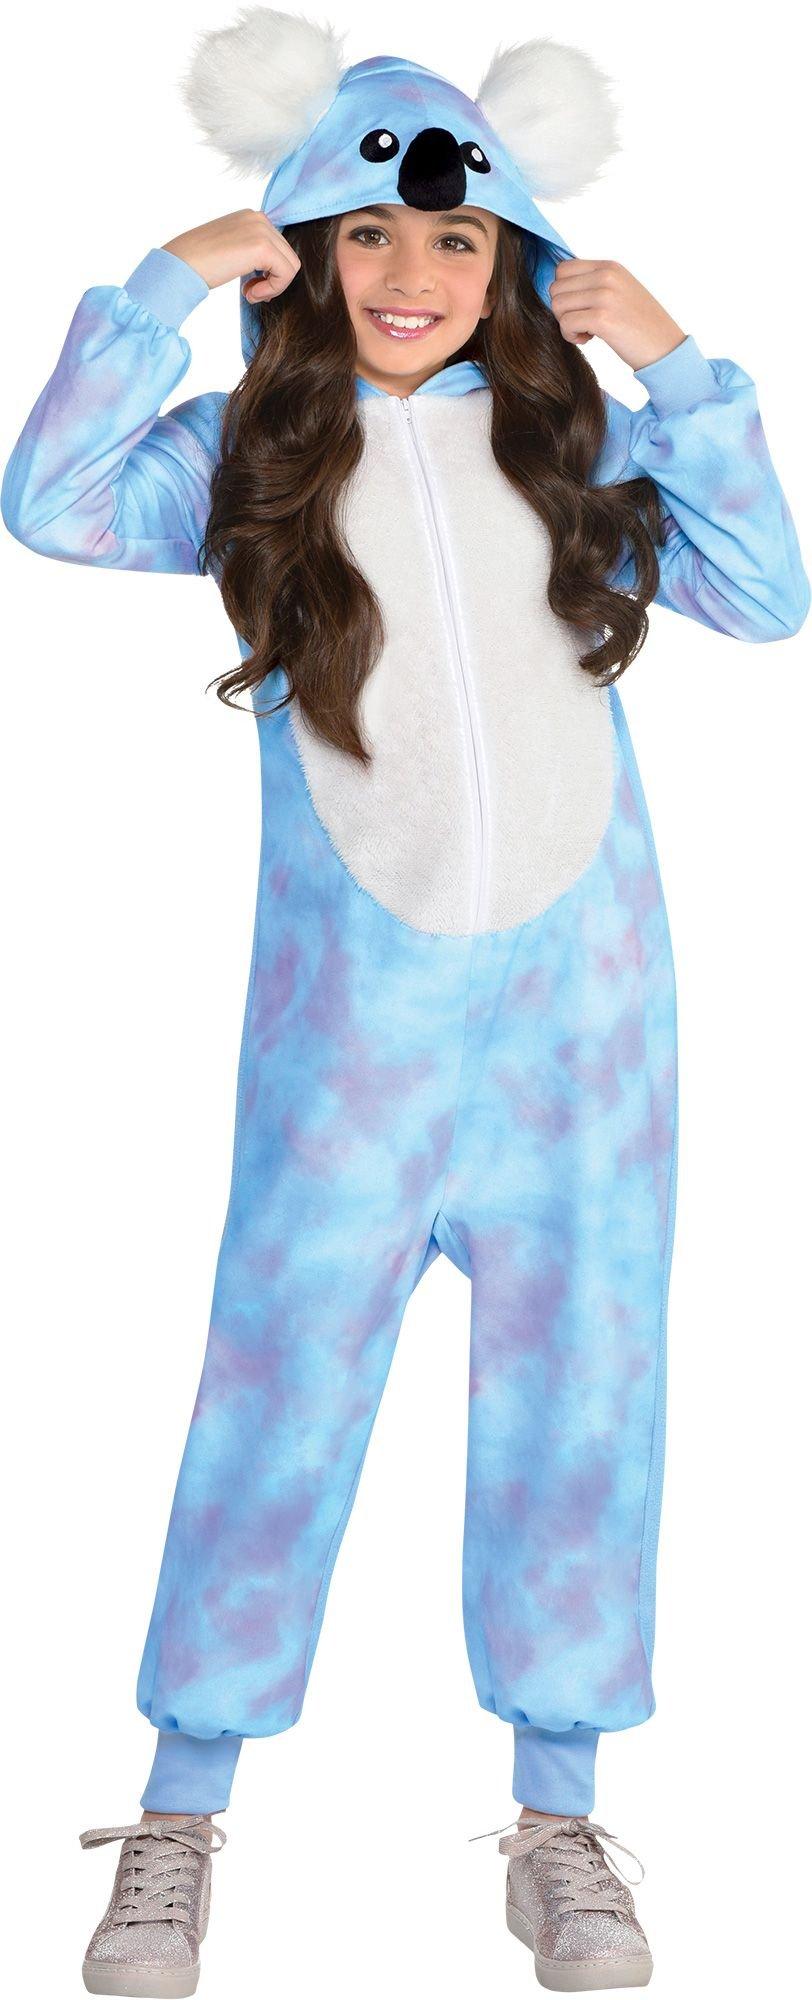 Haloween Costume Stitch Jumpsuit Toddler And Character Hood Blue